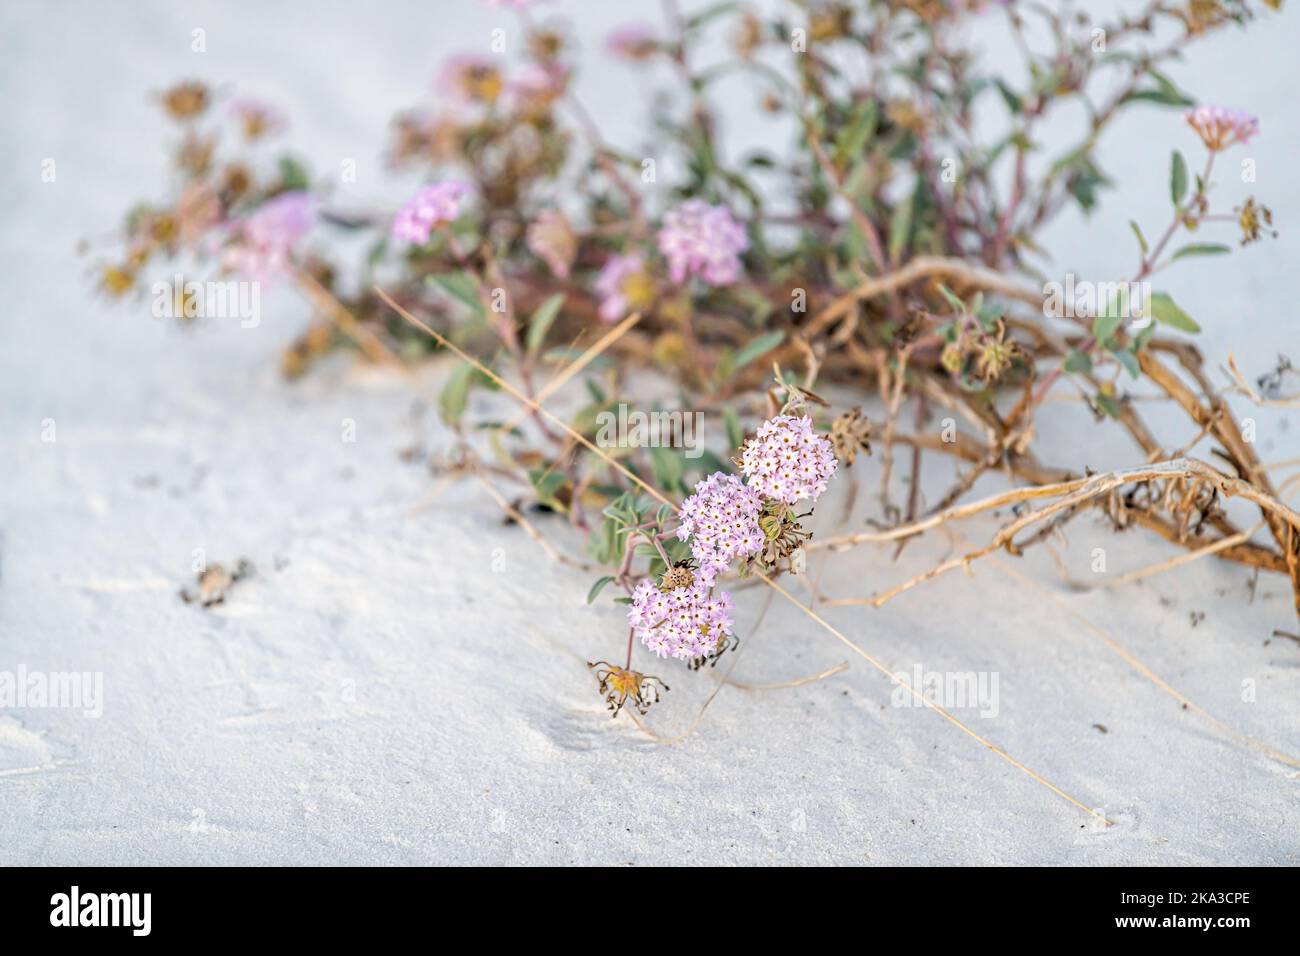 White sands dunes national park in New Mexico with closeup of purple sand verbena pink flowers plant on ground Stock Photo